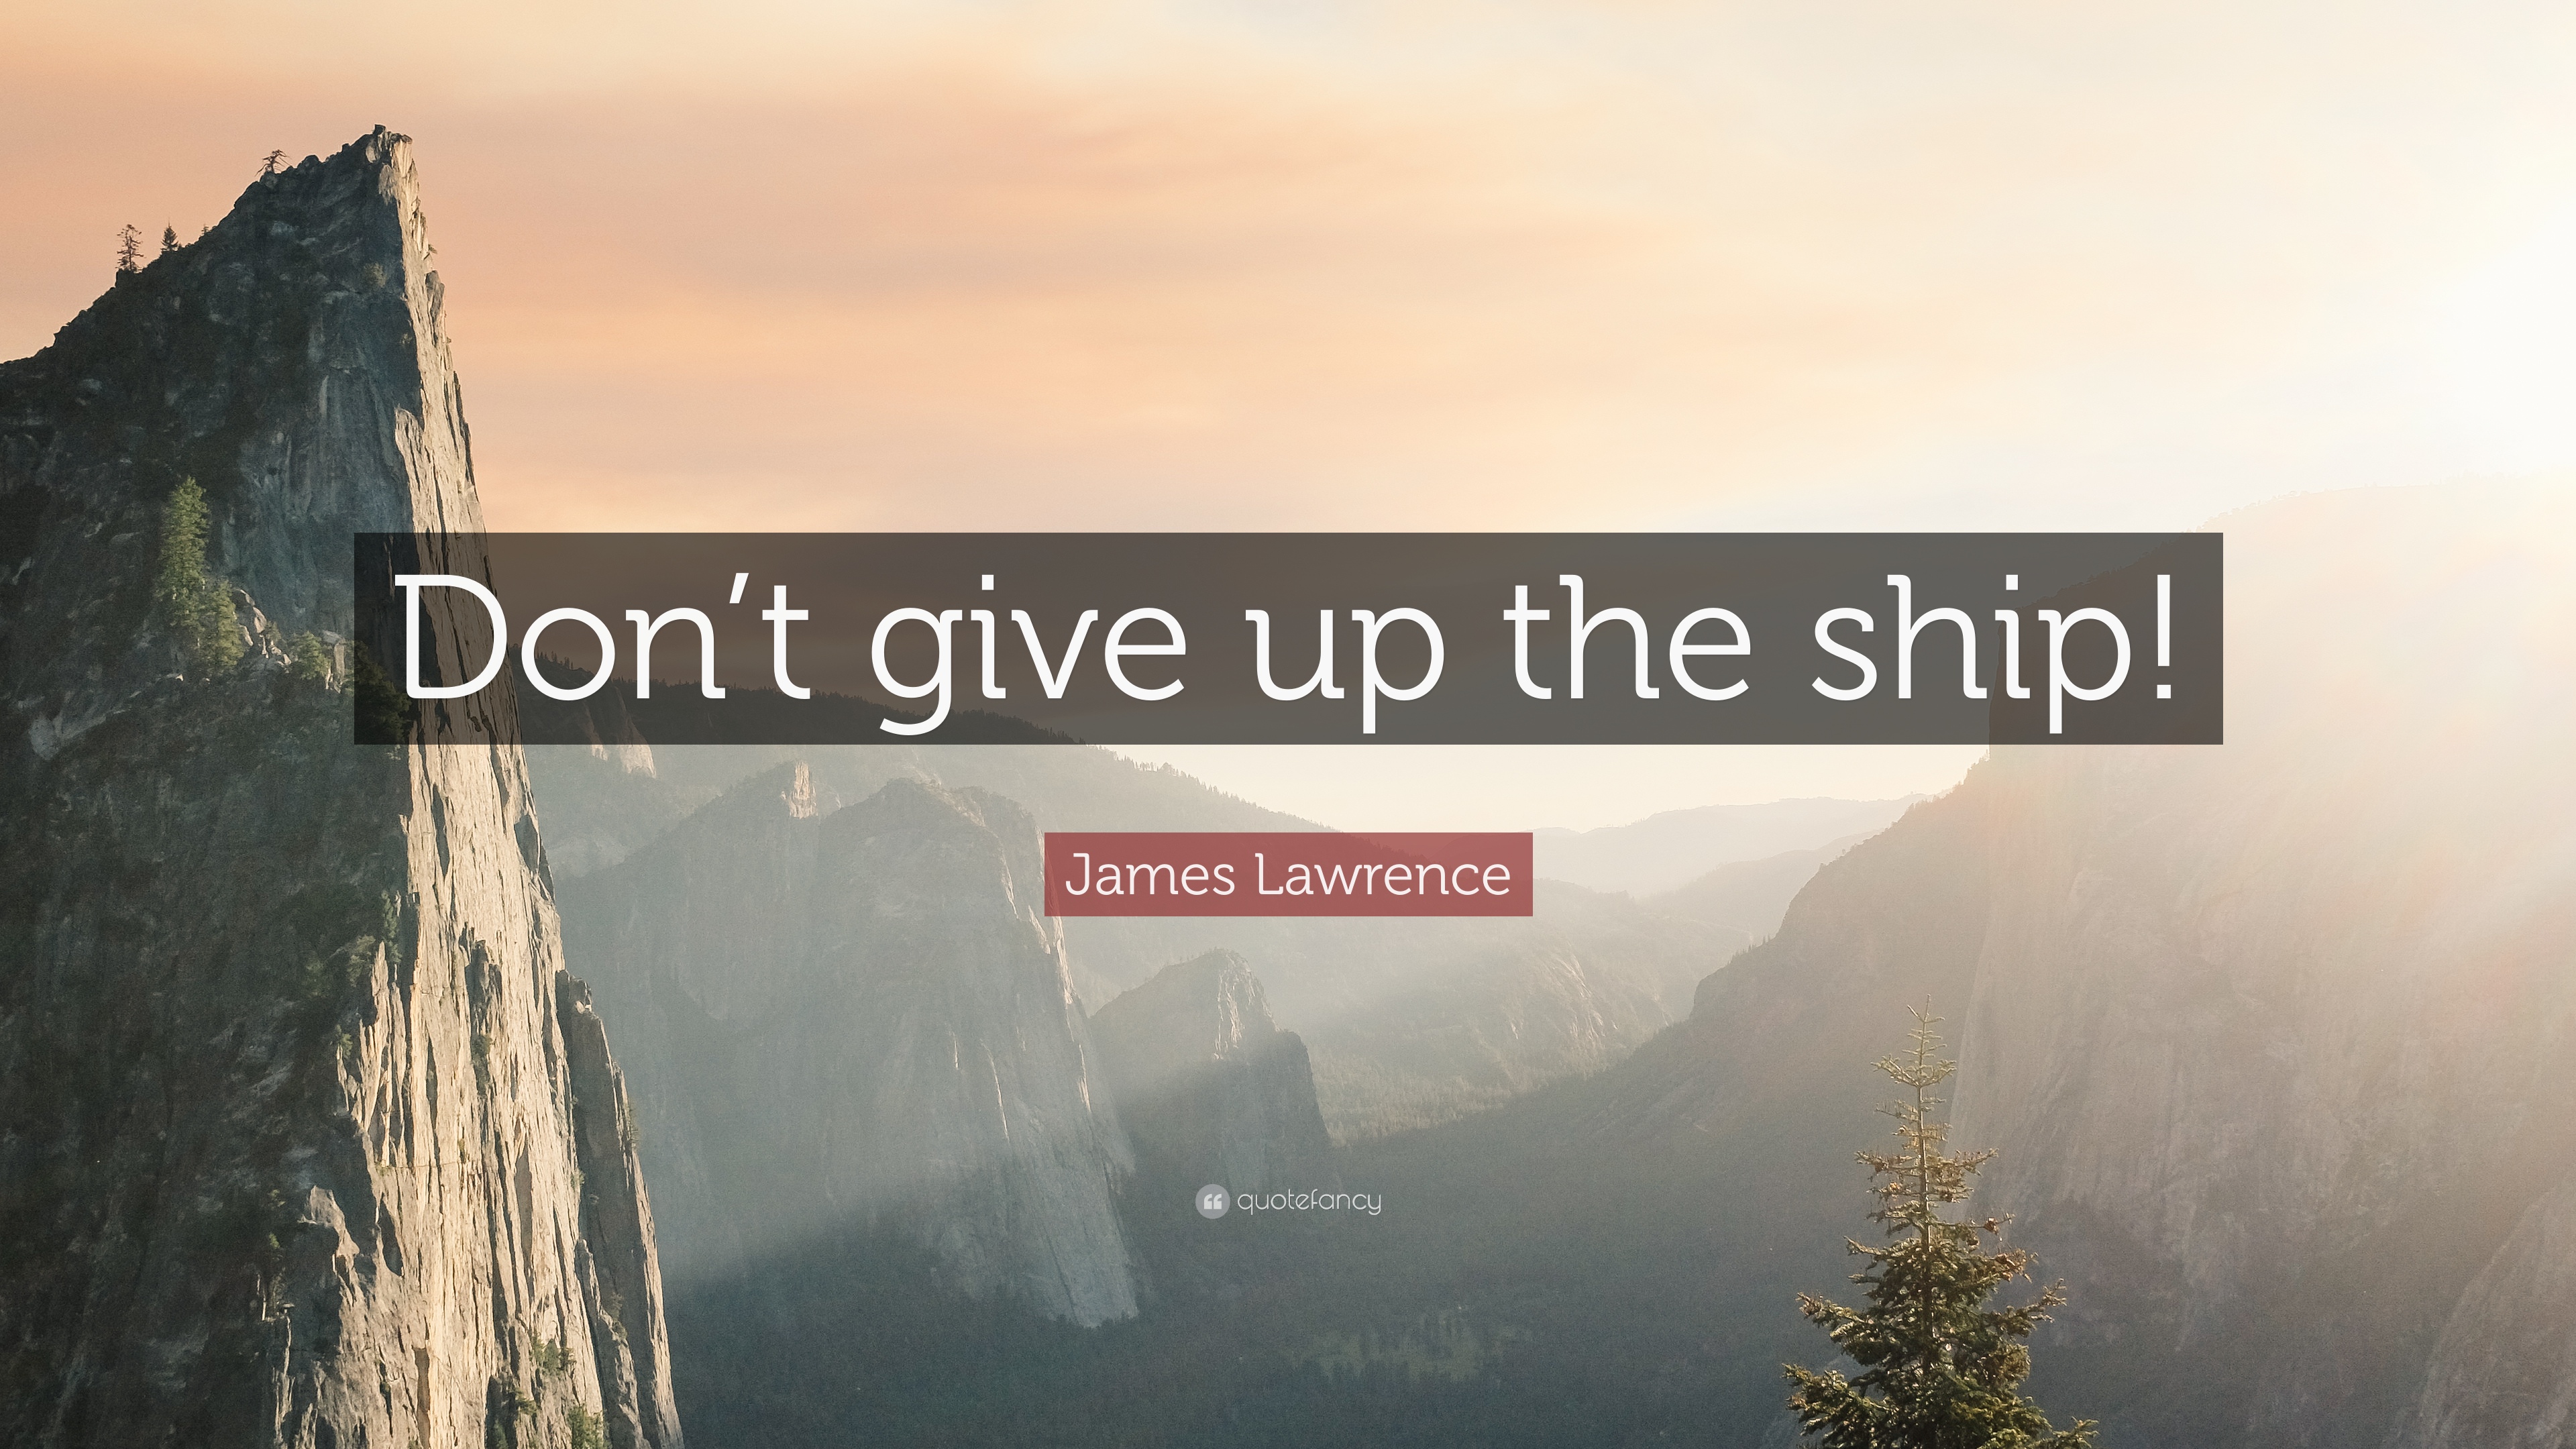 James Lawrence Quote: “Don't give up the ship!” 7 wallpaper